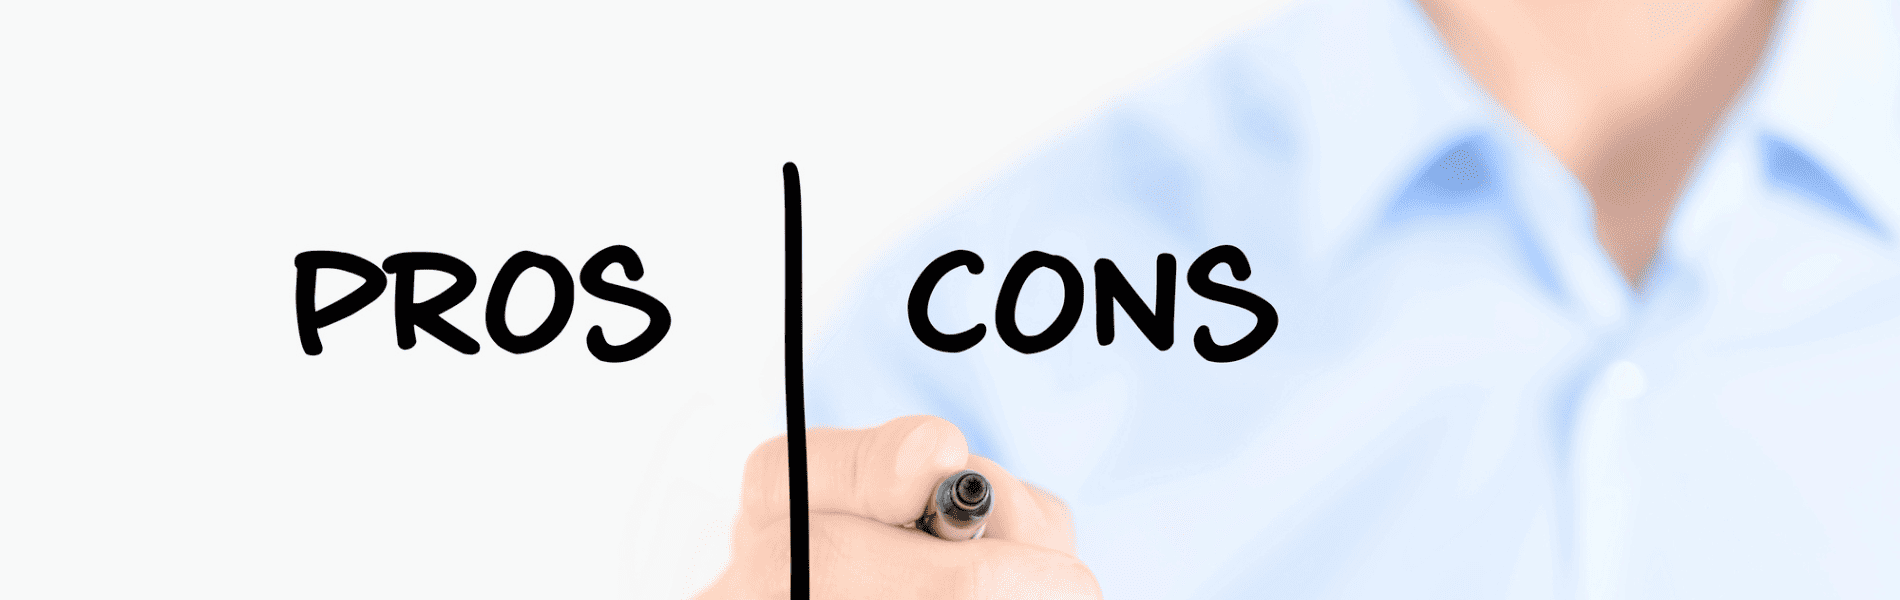 seo pros and cons